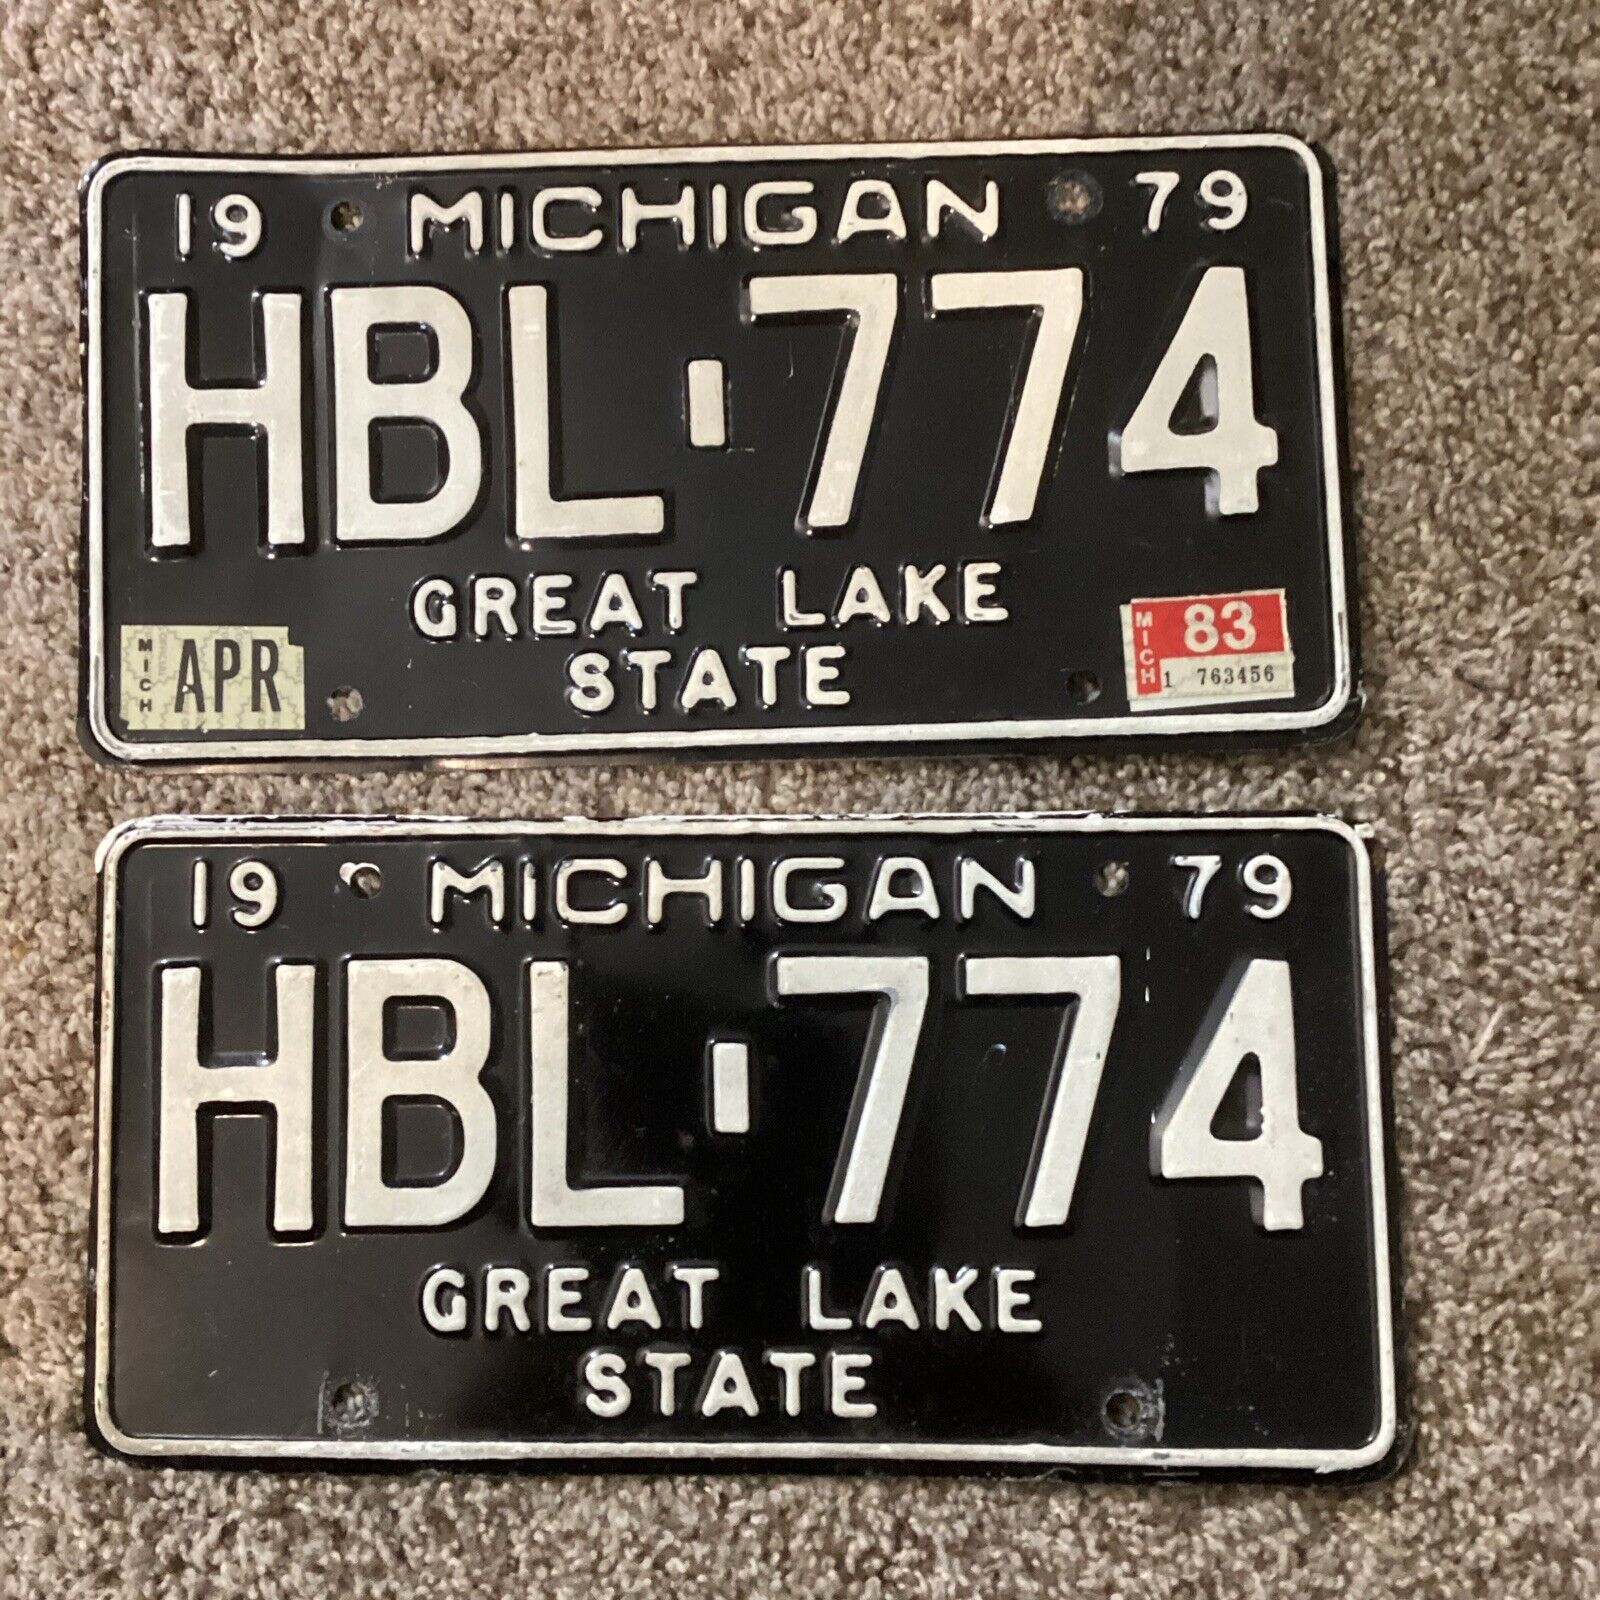 1979 Michigan License Plates matched pair Apr 83 Tags black “Great Lakes State”